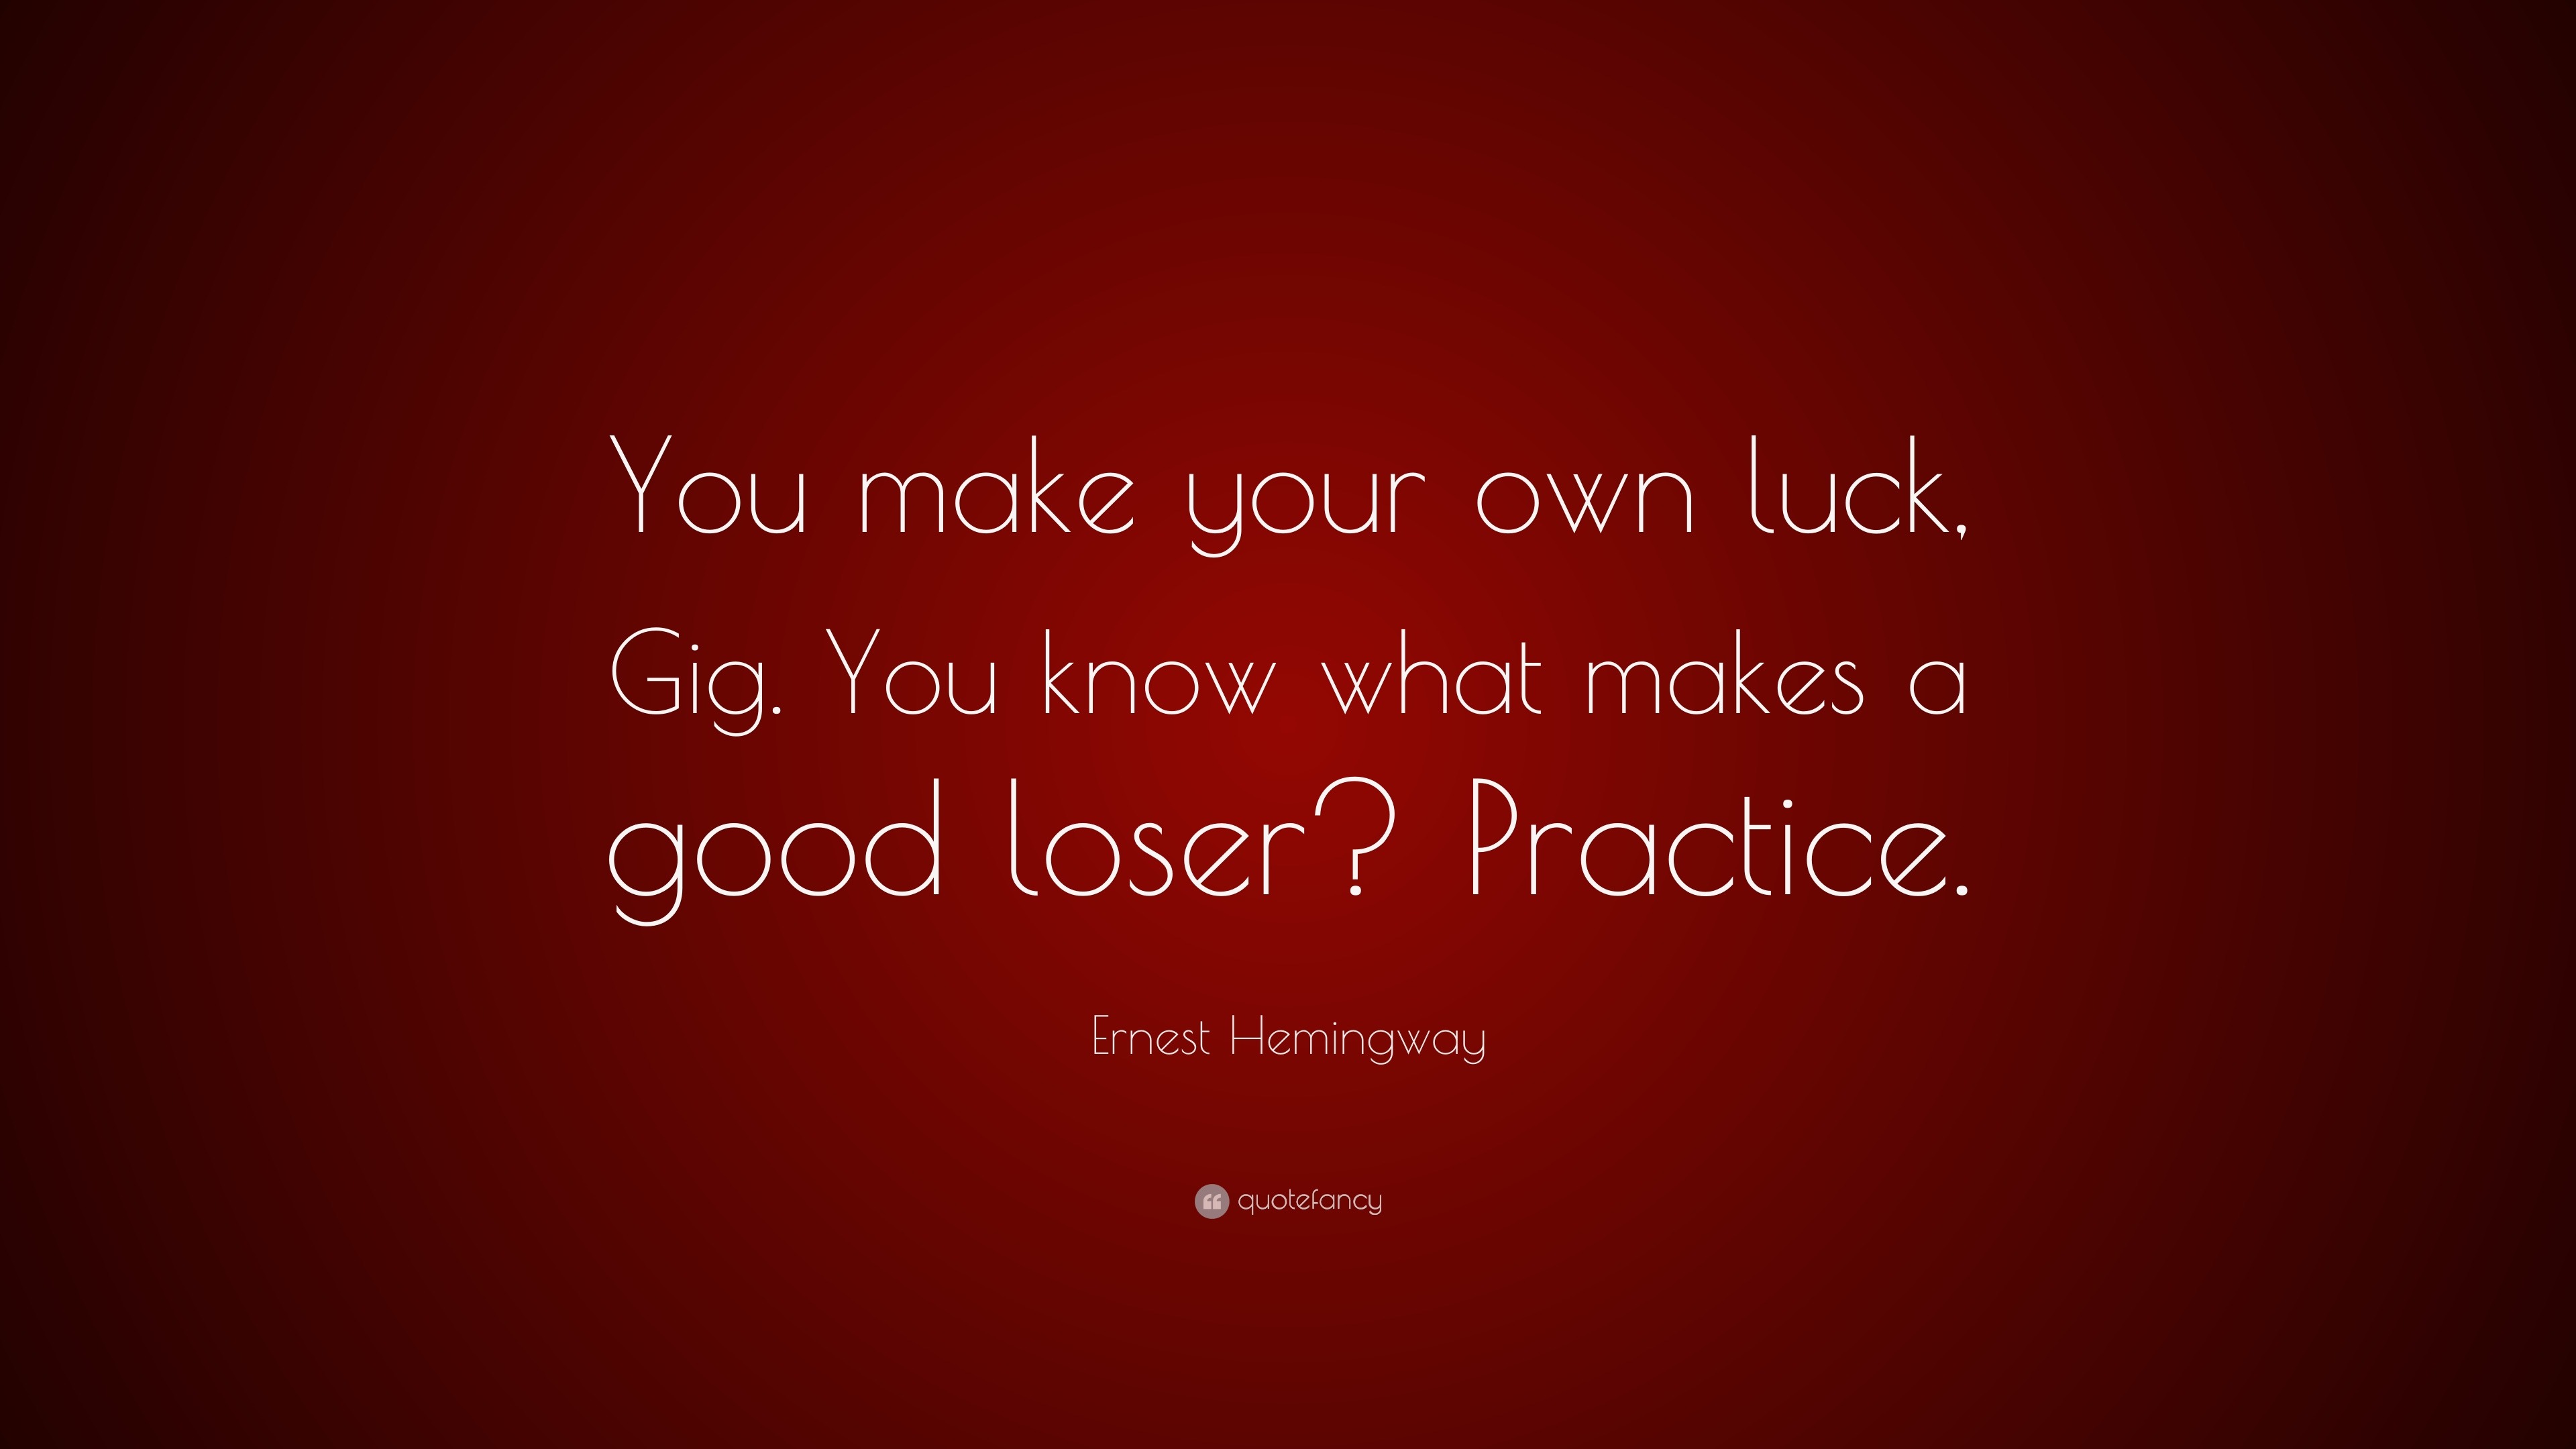 Ernest Hemingway Quote “You make your own luck Gig You know what